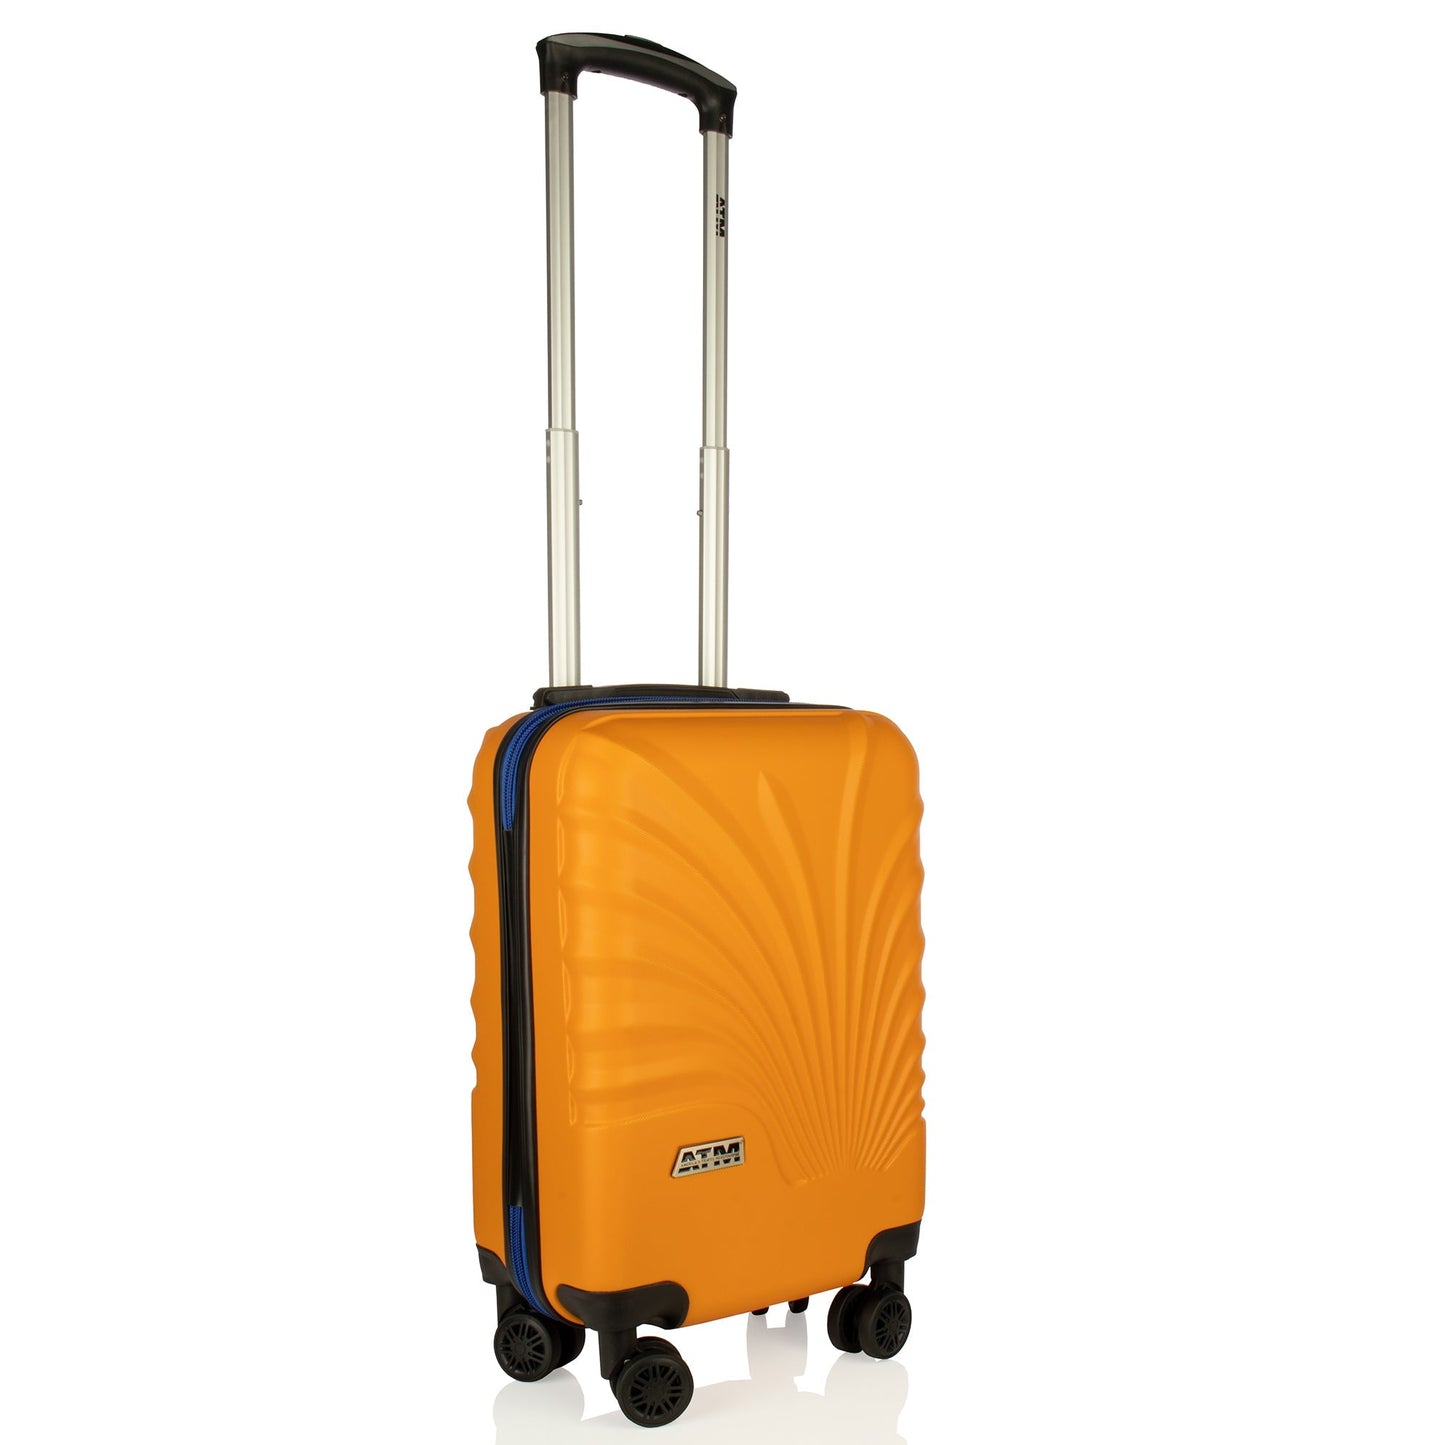 Fanciful Collection Orange Luggage 4 Piece Set